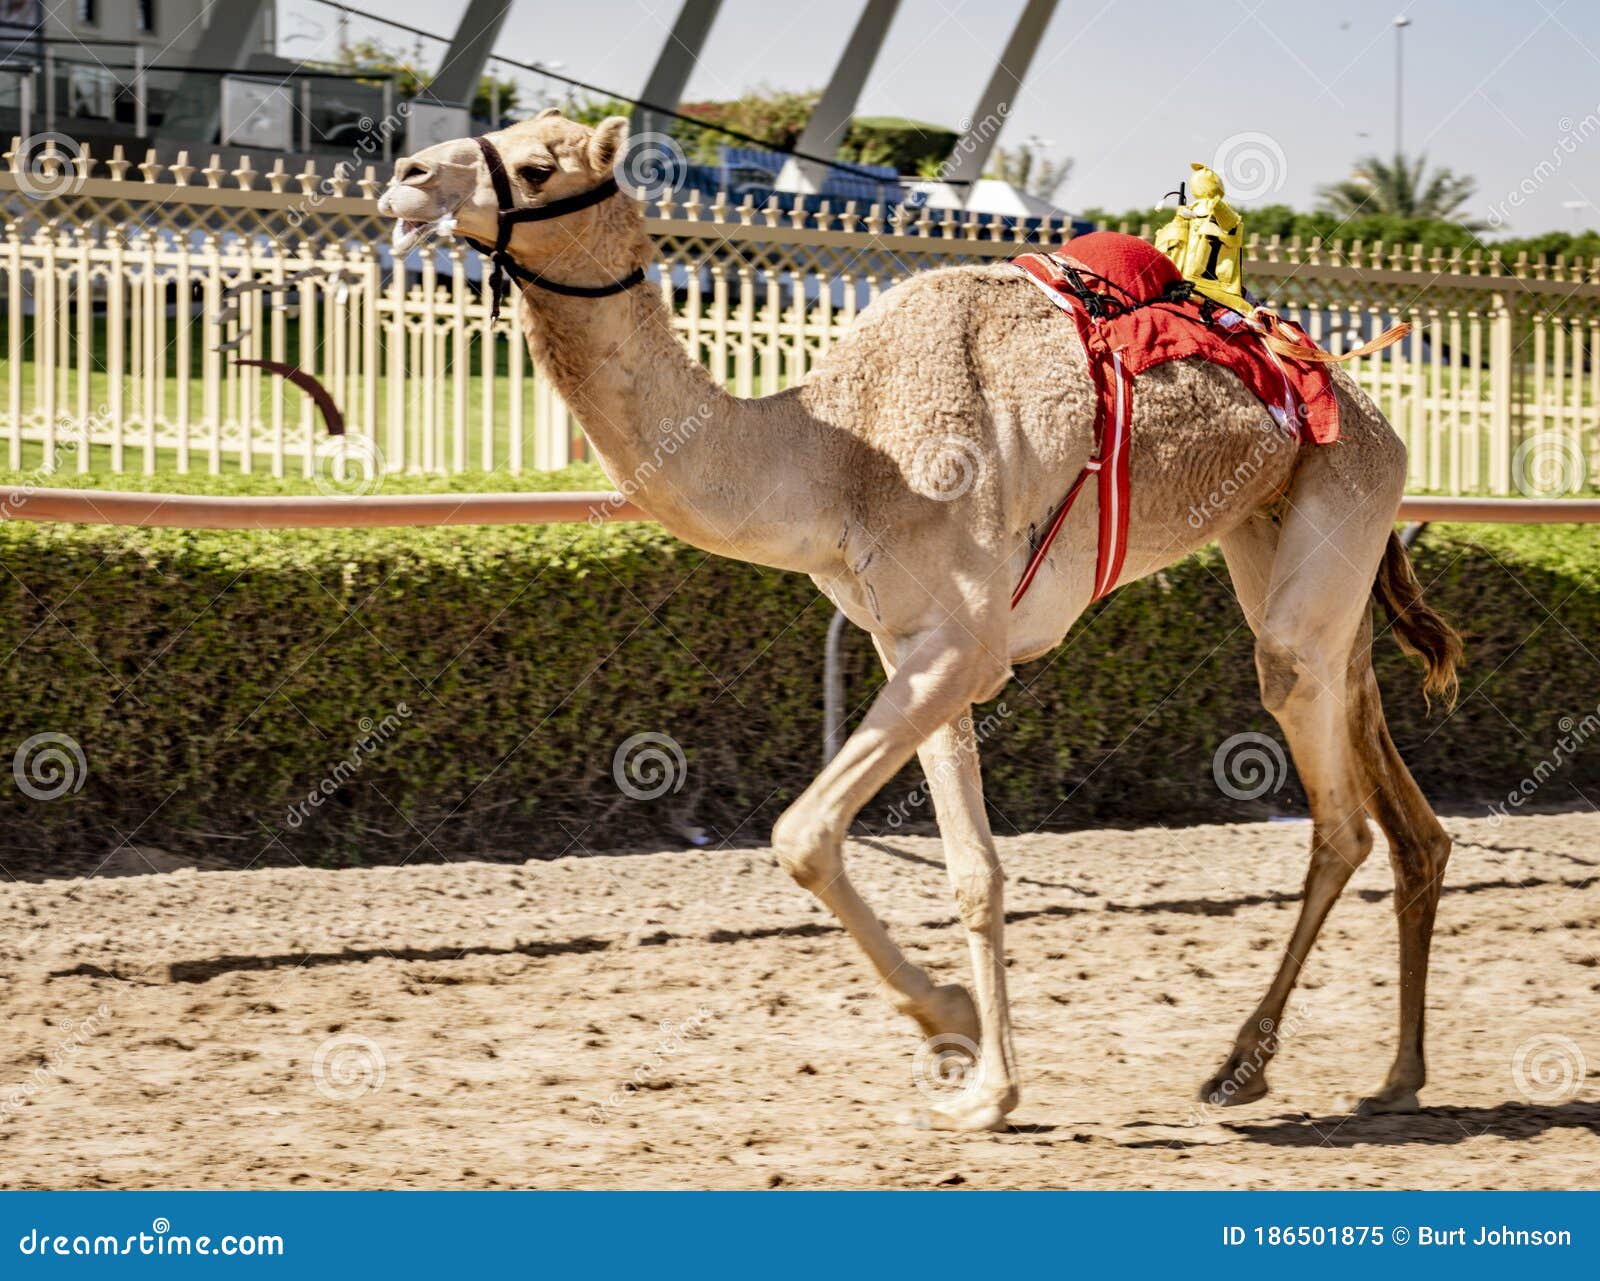 Camel on Track Being Trained To Race with Tiny Robot Jockey on His Back Stock Image - Image of arabian, culture: